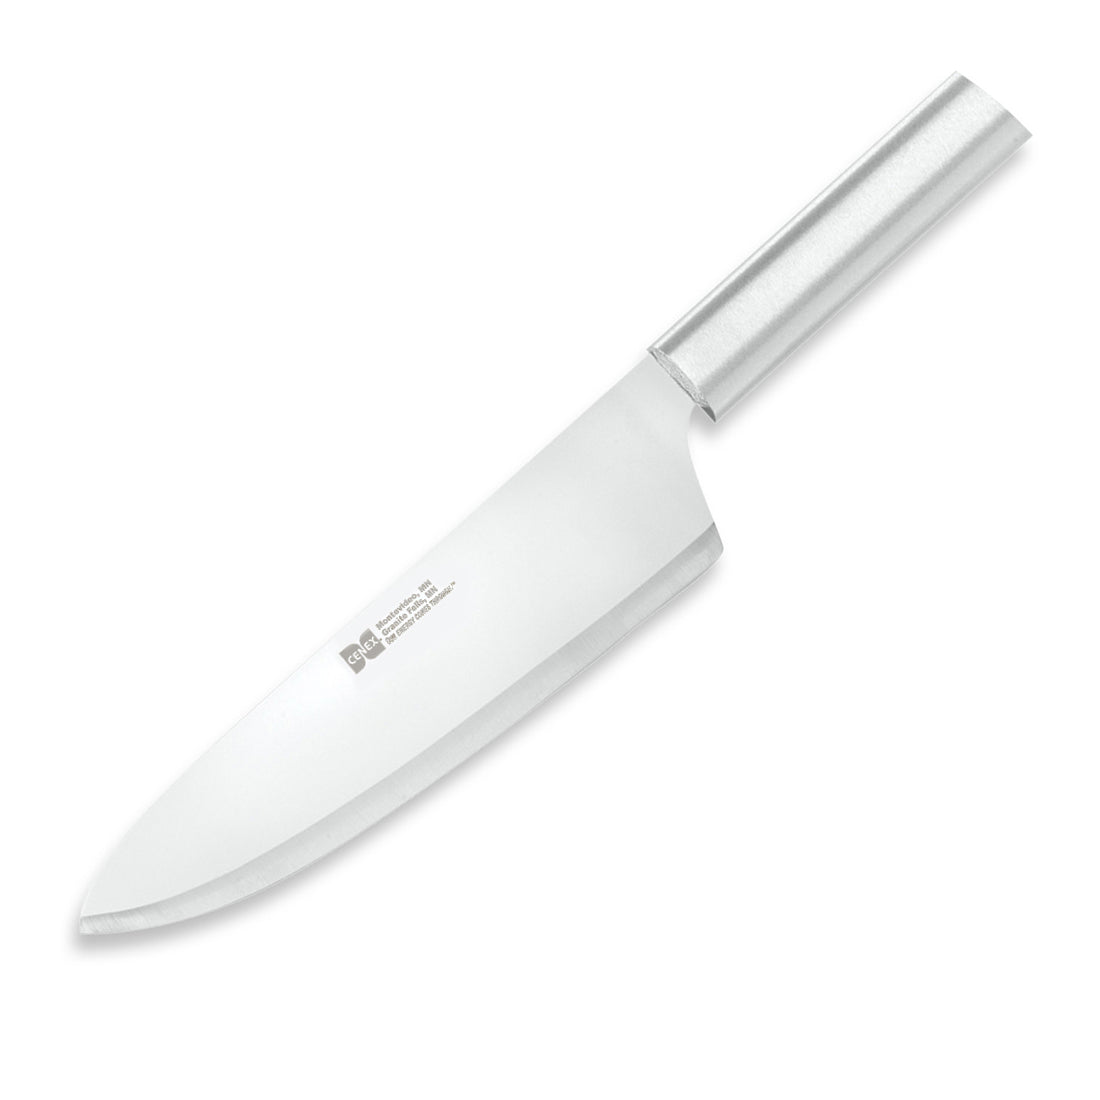 French Chef Knife